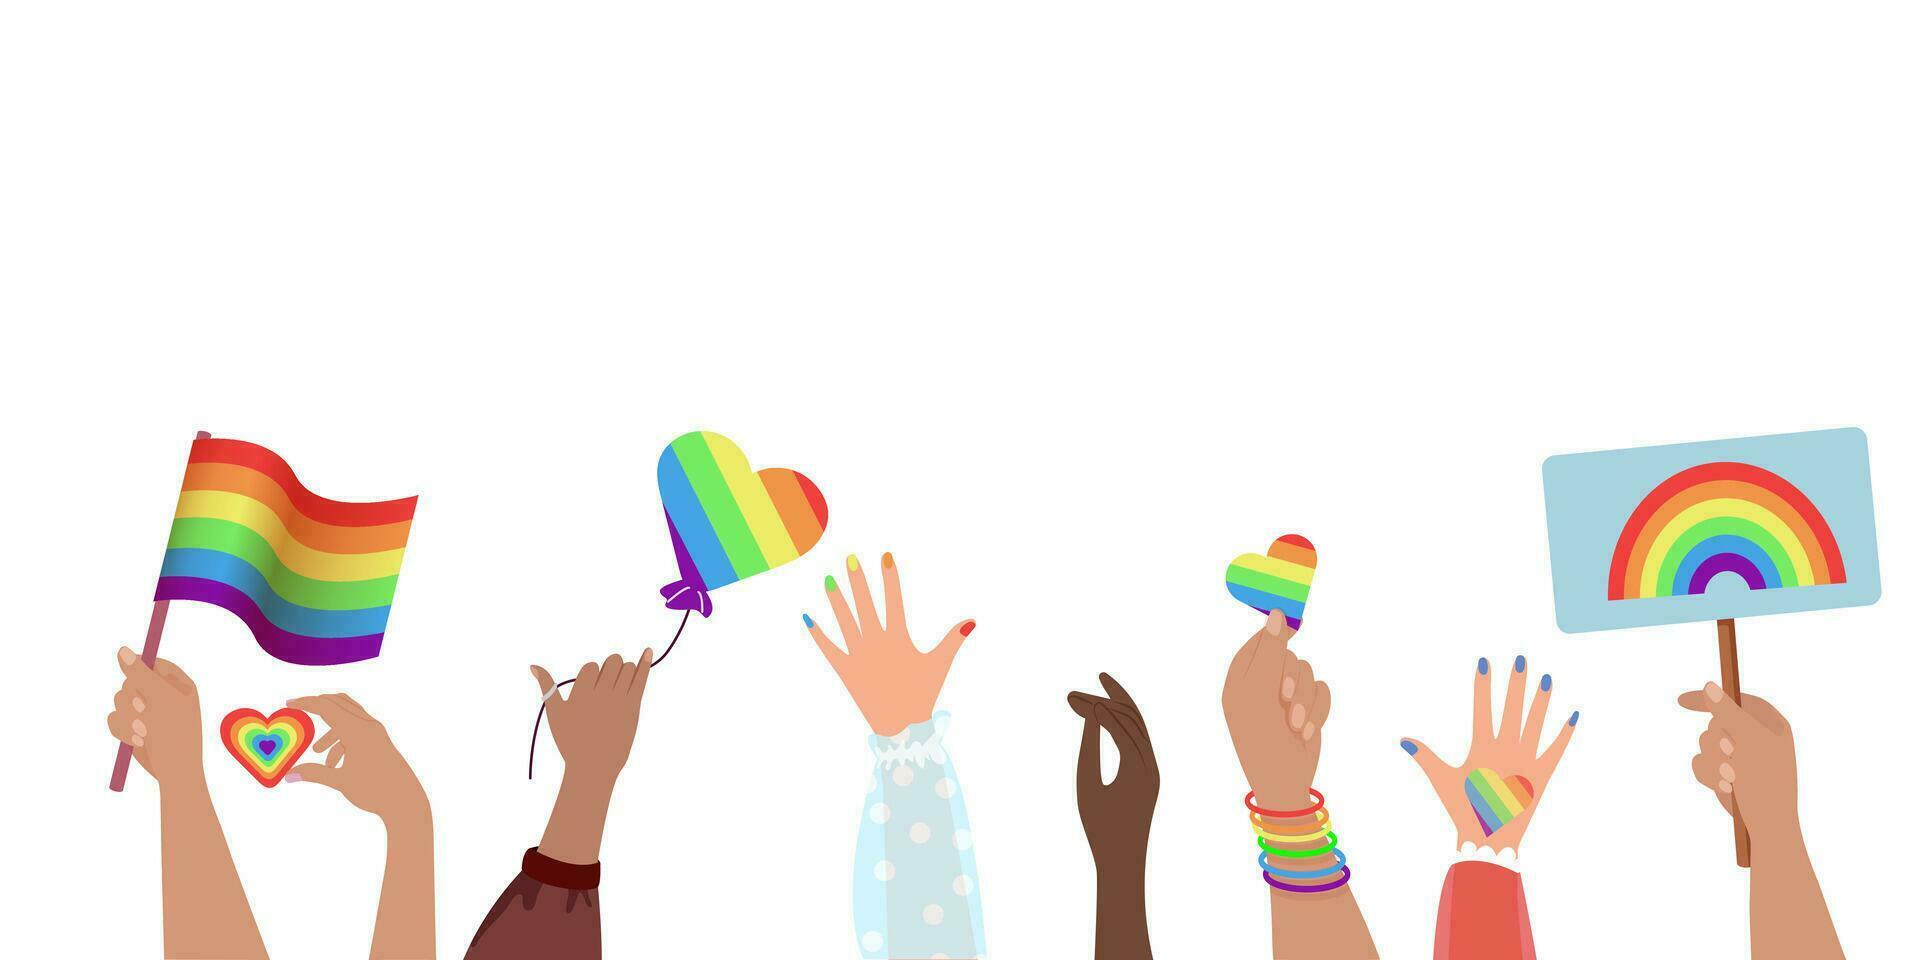 Hands holding lgbt flag, lgbt symbol. People crowd with rainbow flag, rainbow hearts and hearts, lgbtq community, pride month. Gay parade placards vector illustration background with copy space.